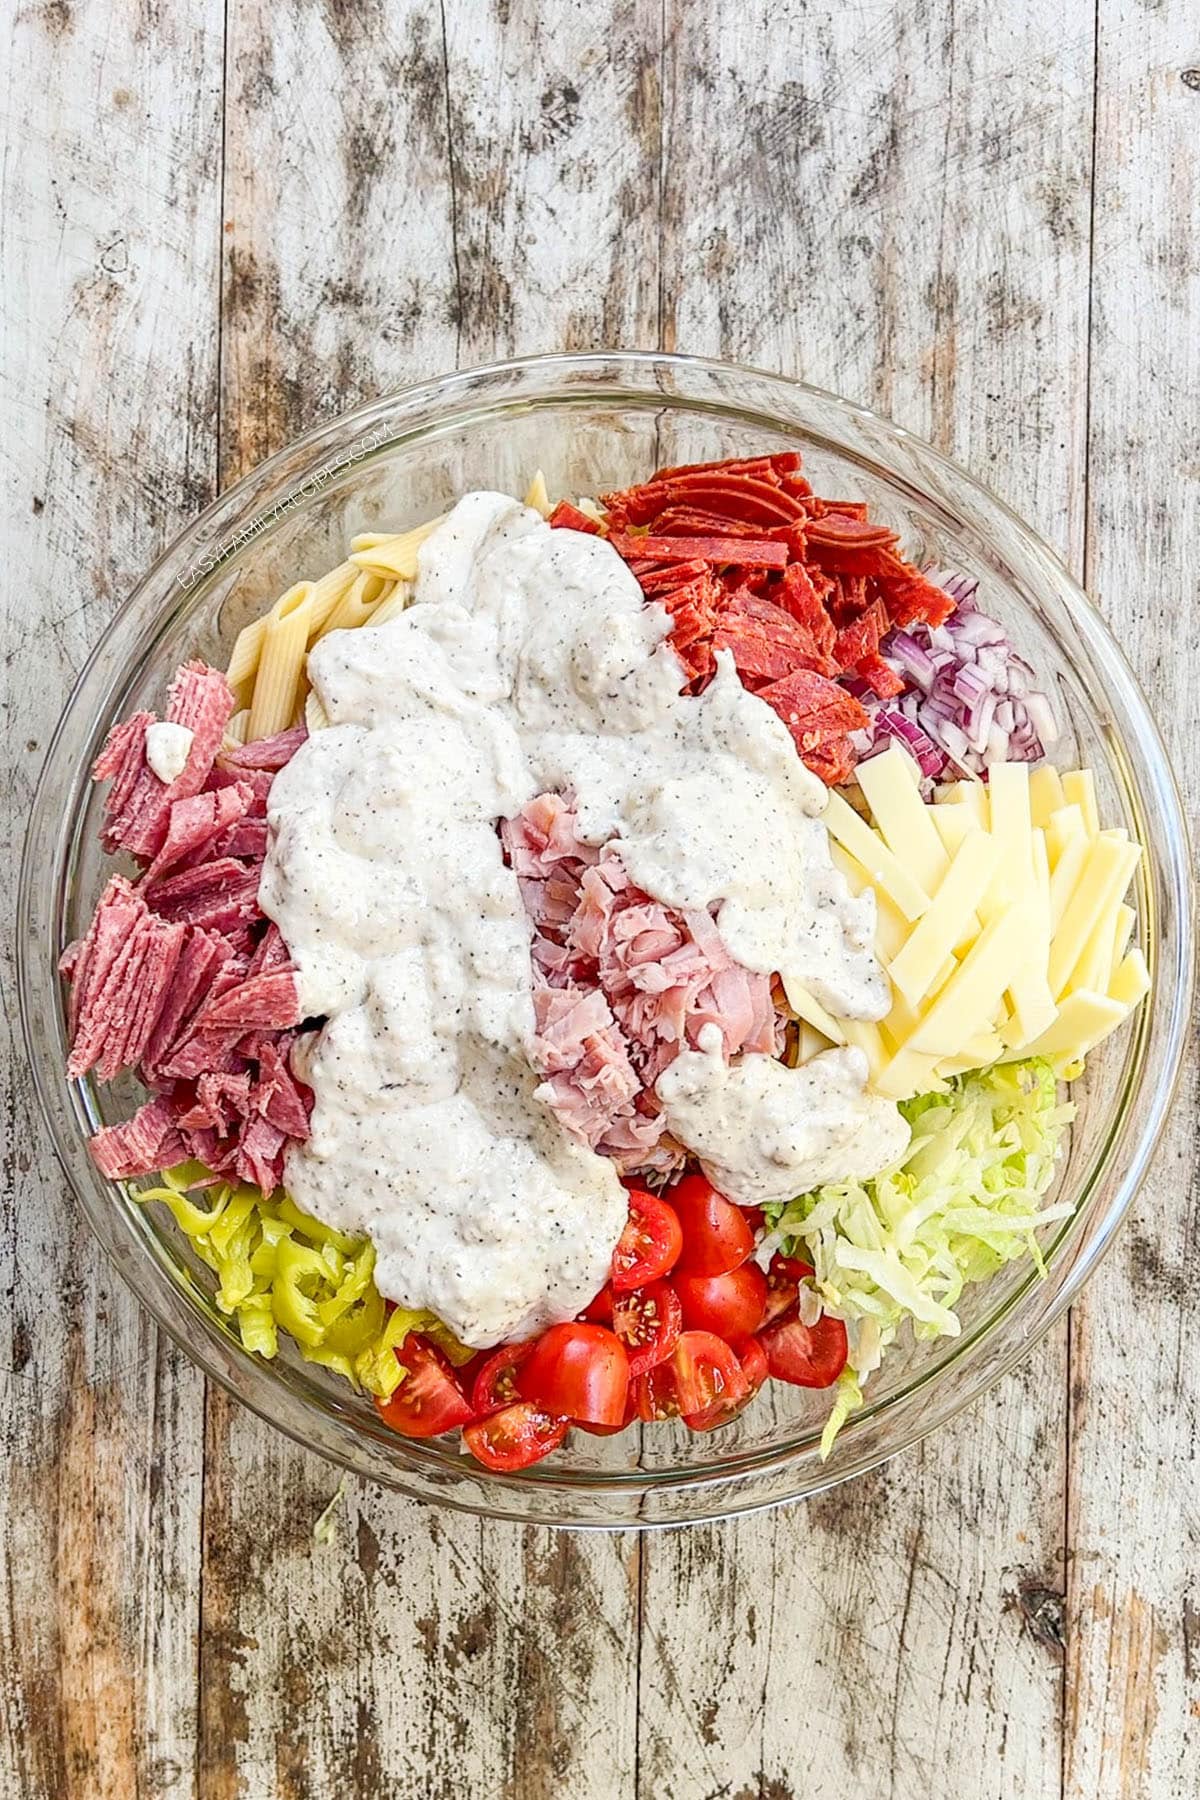 Ingredients for Italian Grinder Pasta Salad in a bowl with creamy dressing drizzled over the top.